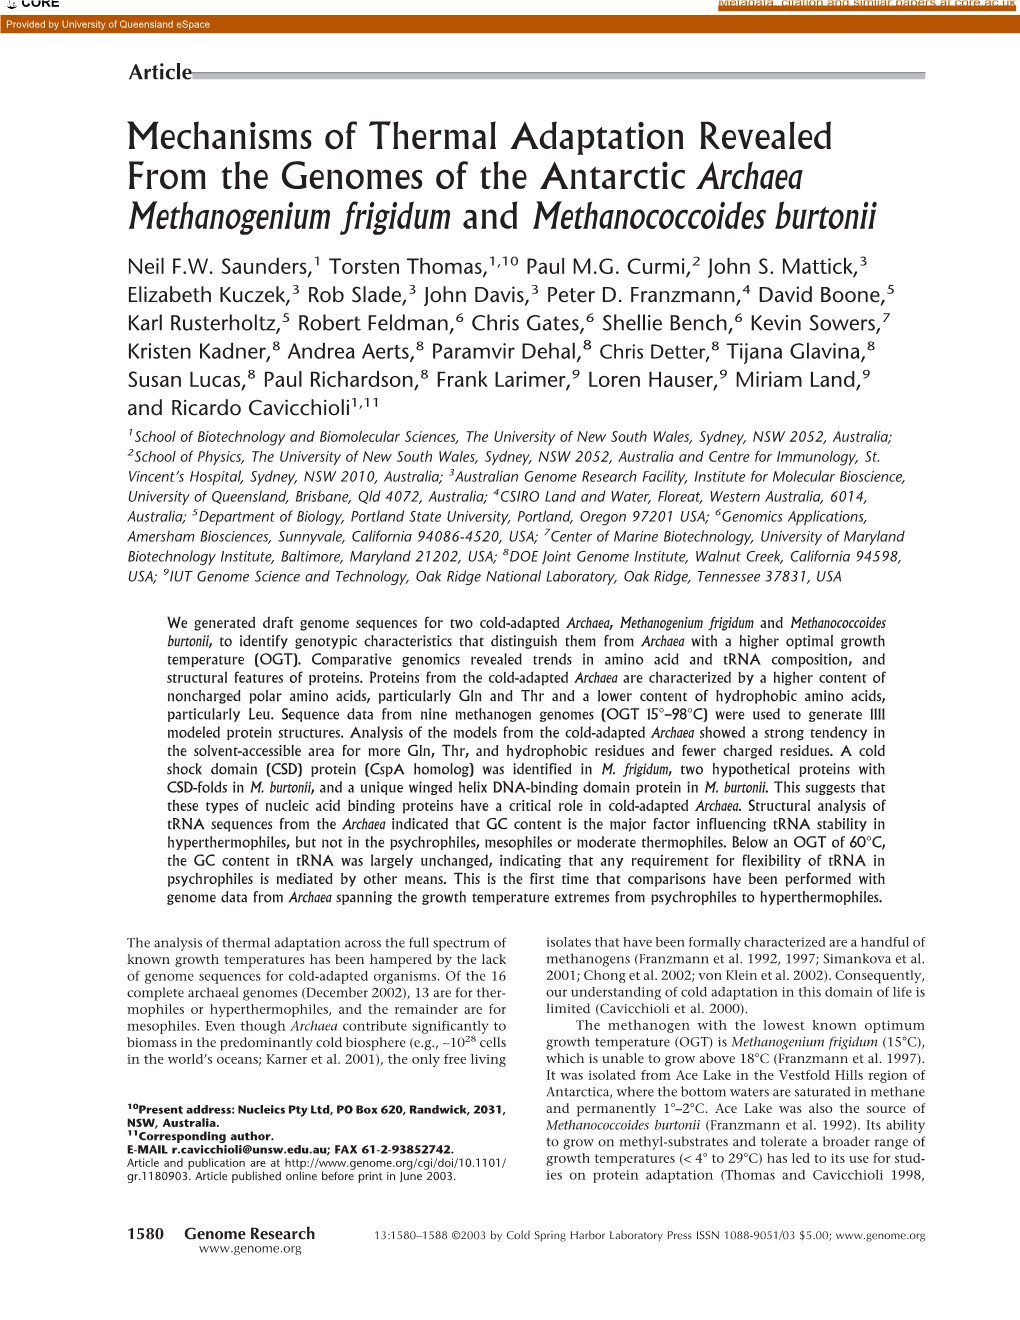 Mechanisms of Thermal Adaptation Revealed from the Genomes of the Antarctic Archaea Methanogenium Frigidum and Methanococcoides Burtonii Neil F.W